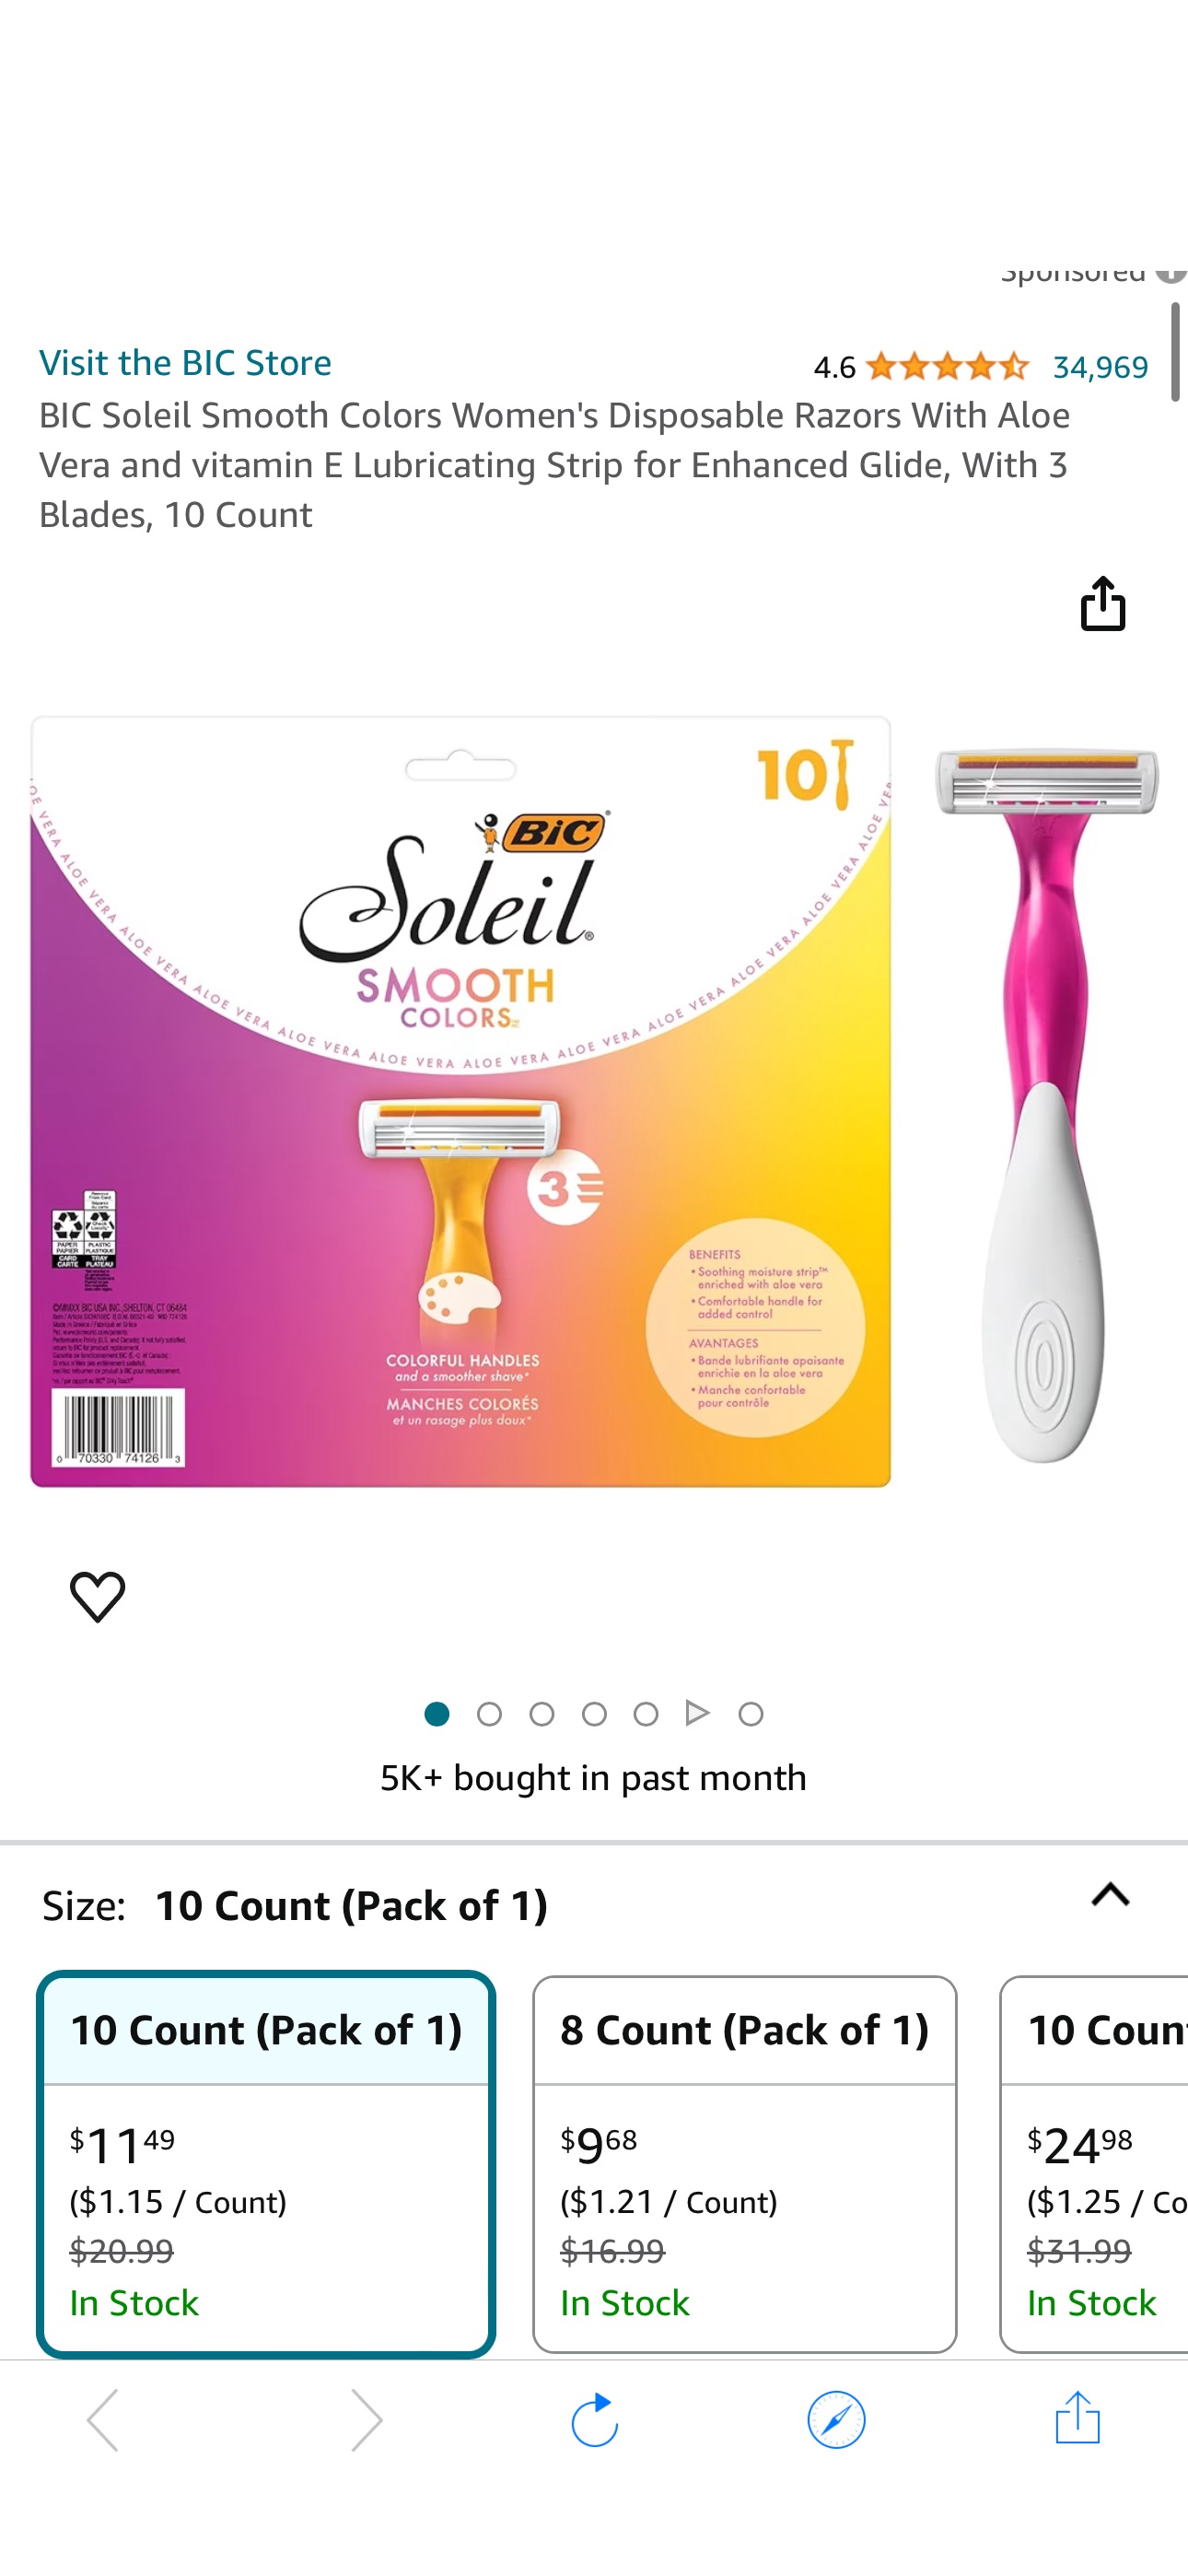 Amazon.com: BIC Soleil Smooth Colors Women's Disposable Razors With Aloe Vera and vitamin E Lubricating Strip for Enhanced Glide, With 3 Blades, 10 Count : Beauty & Personal Care